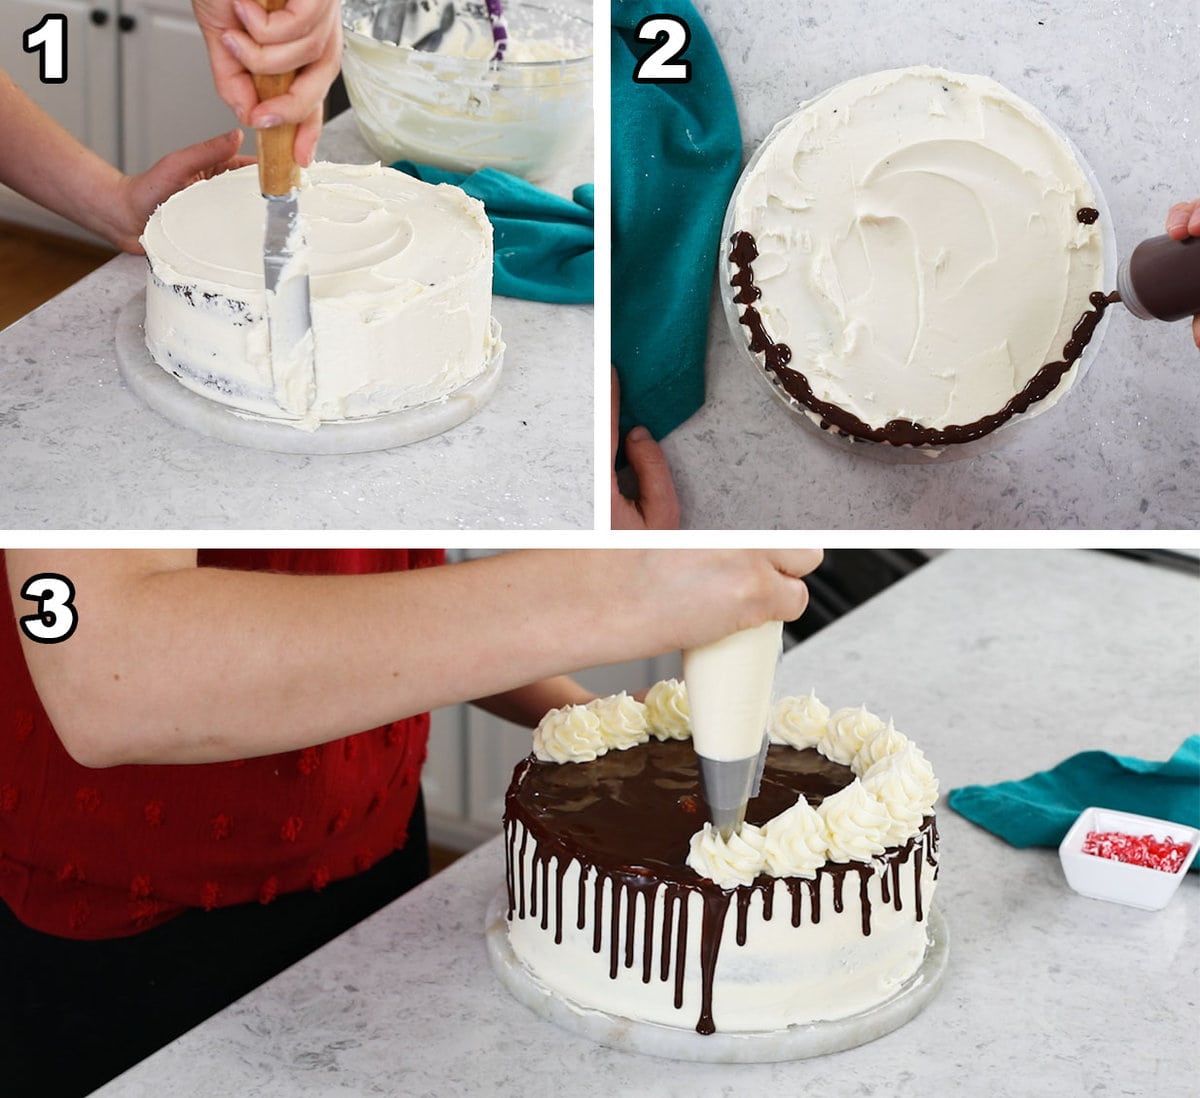 Three photos showing a chocolate cake being frosted with white chocolate peppermint frosting and and topped with a chocolate ganache drip.